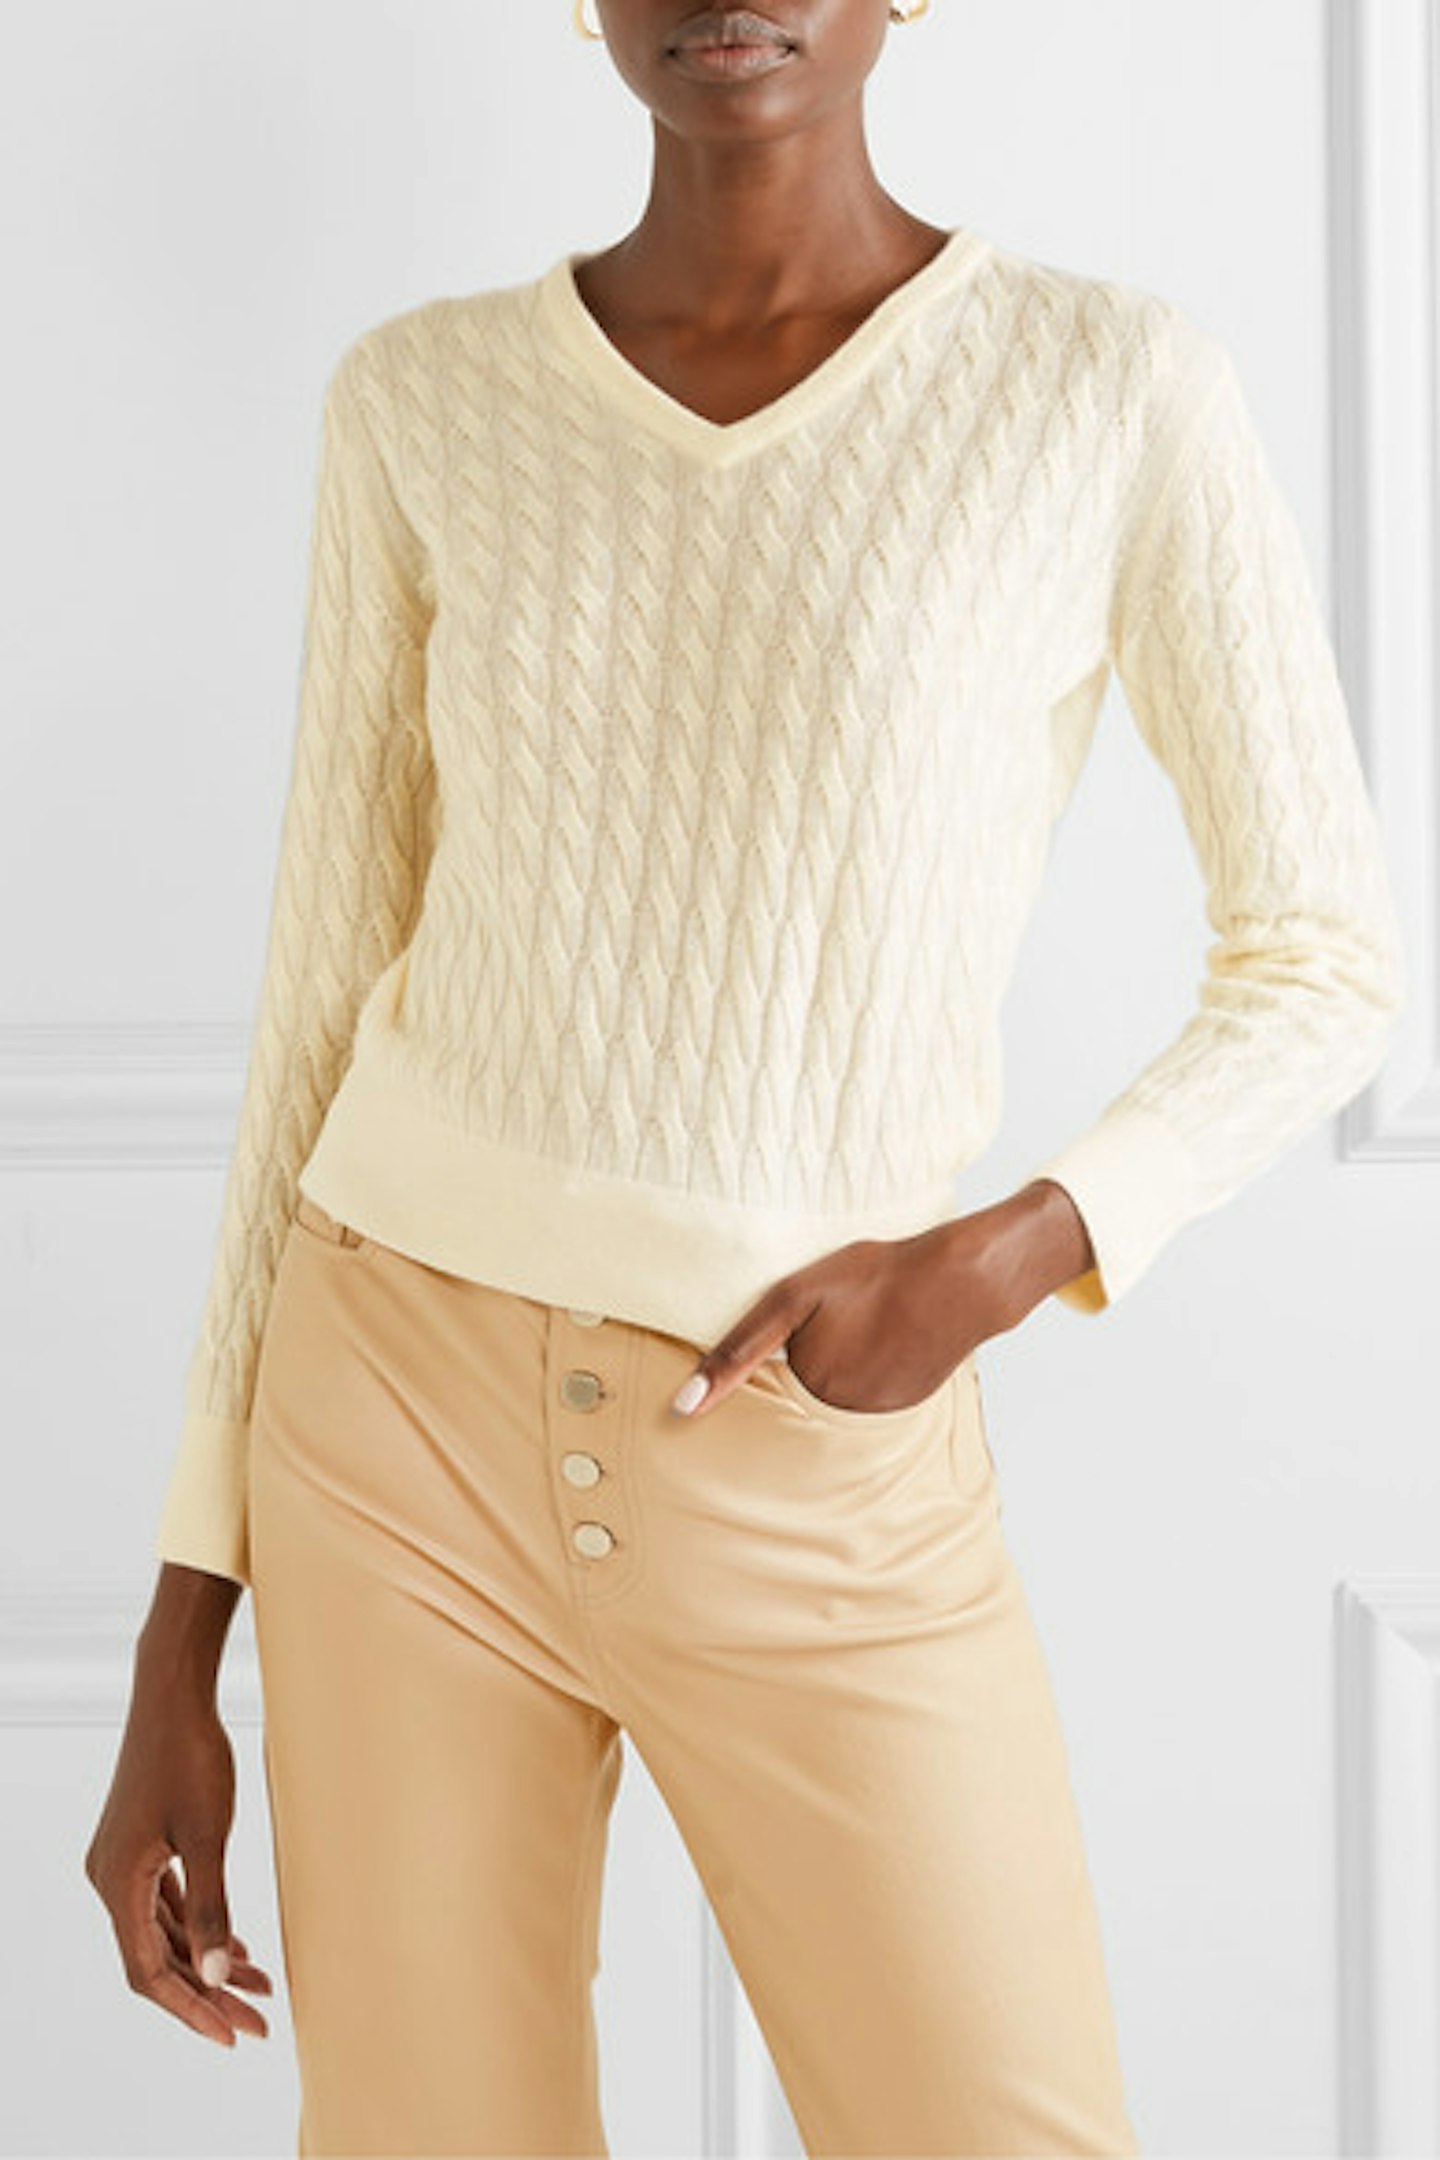 The Row, Cashmere And Silk-Blend Jumper, £1,420